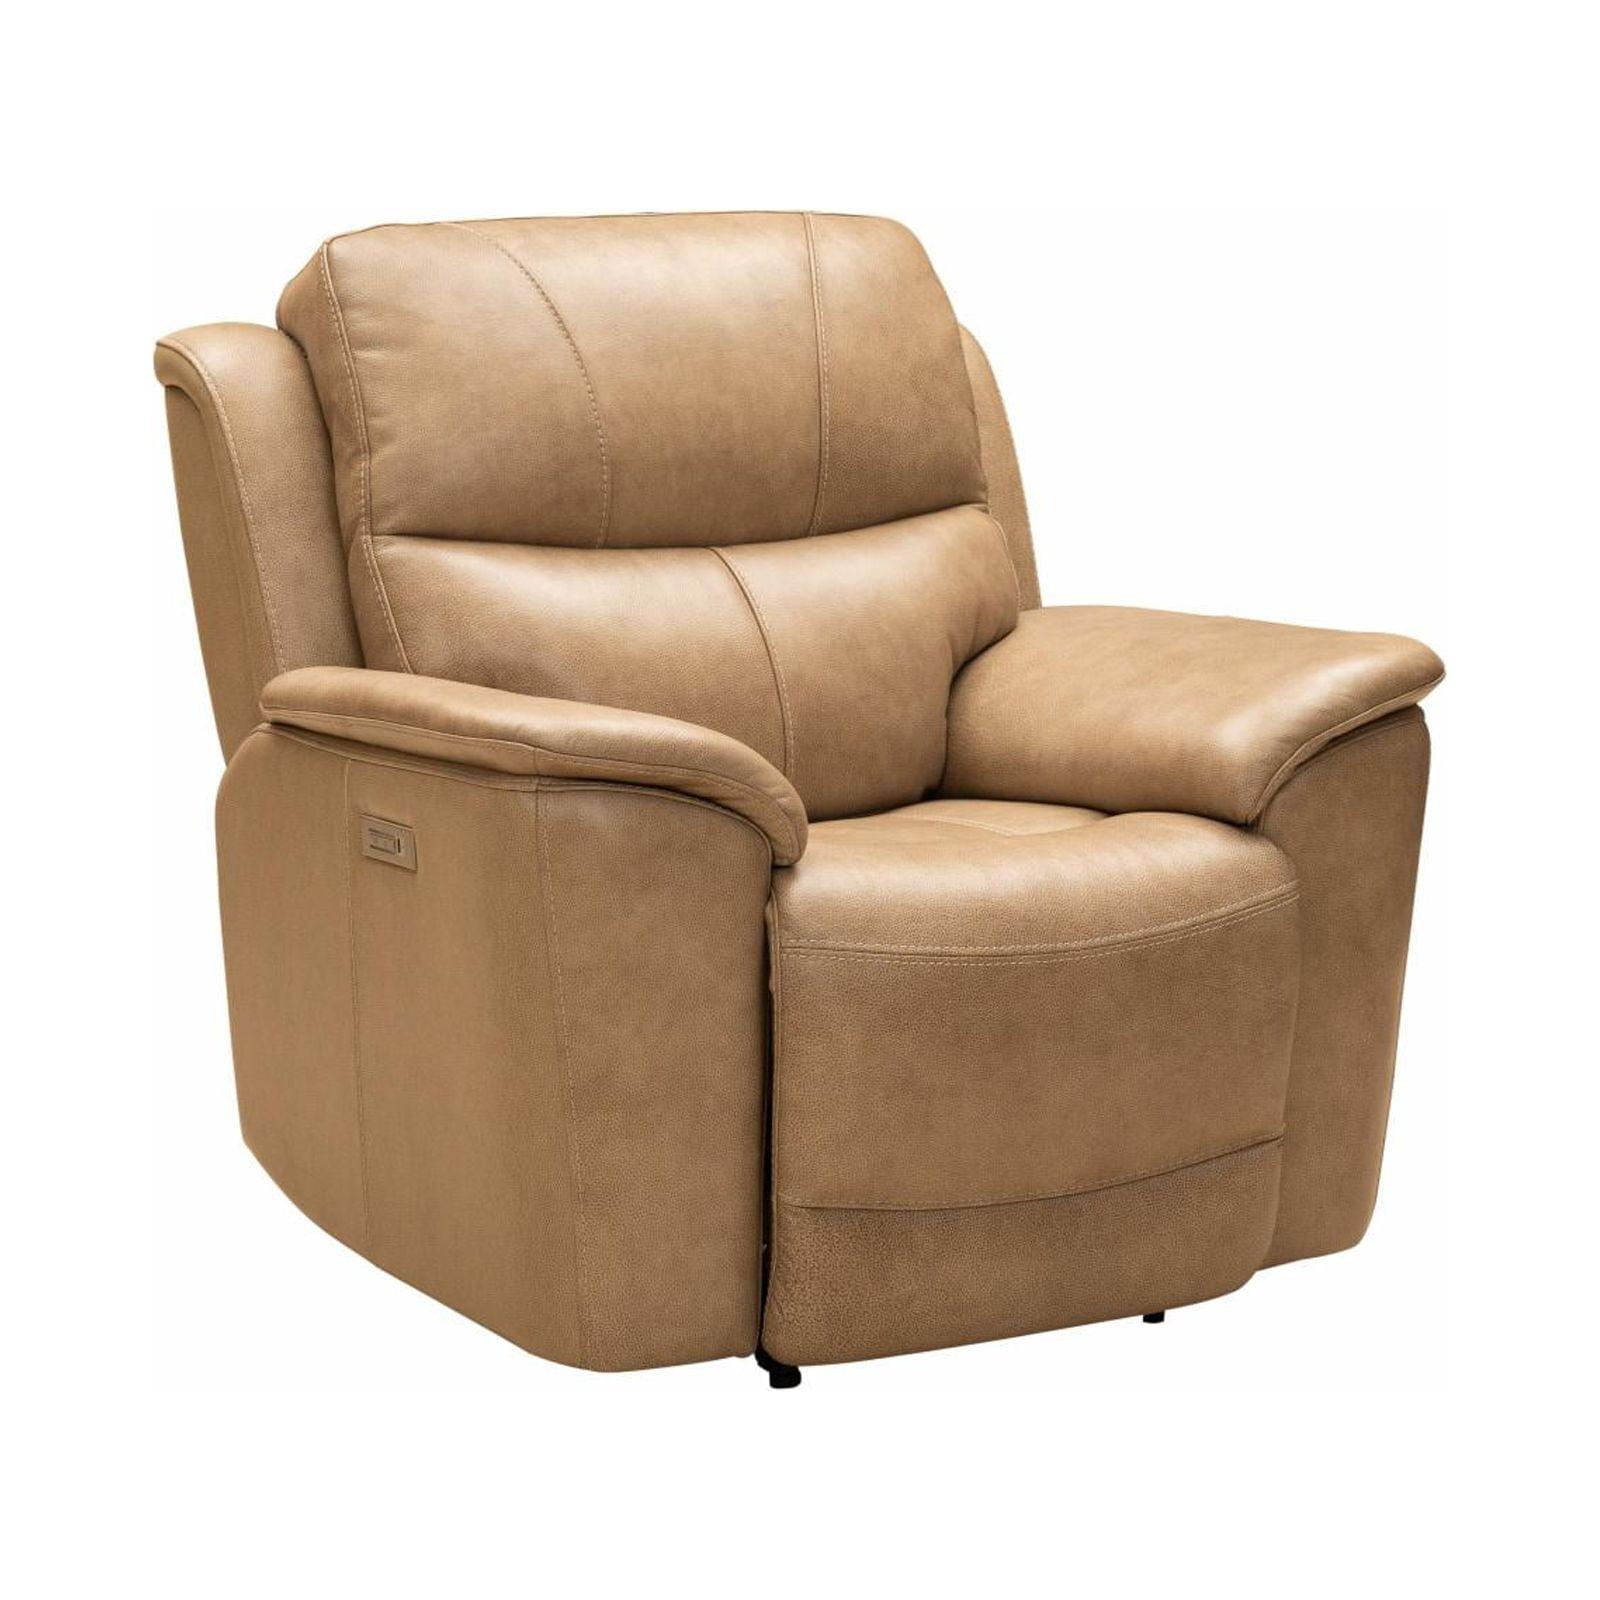 Beige Leather Power Recliner with Wood Accents